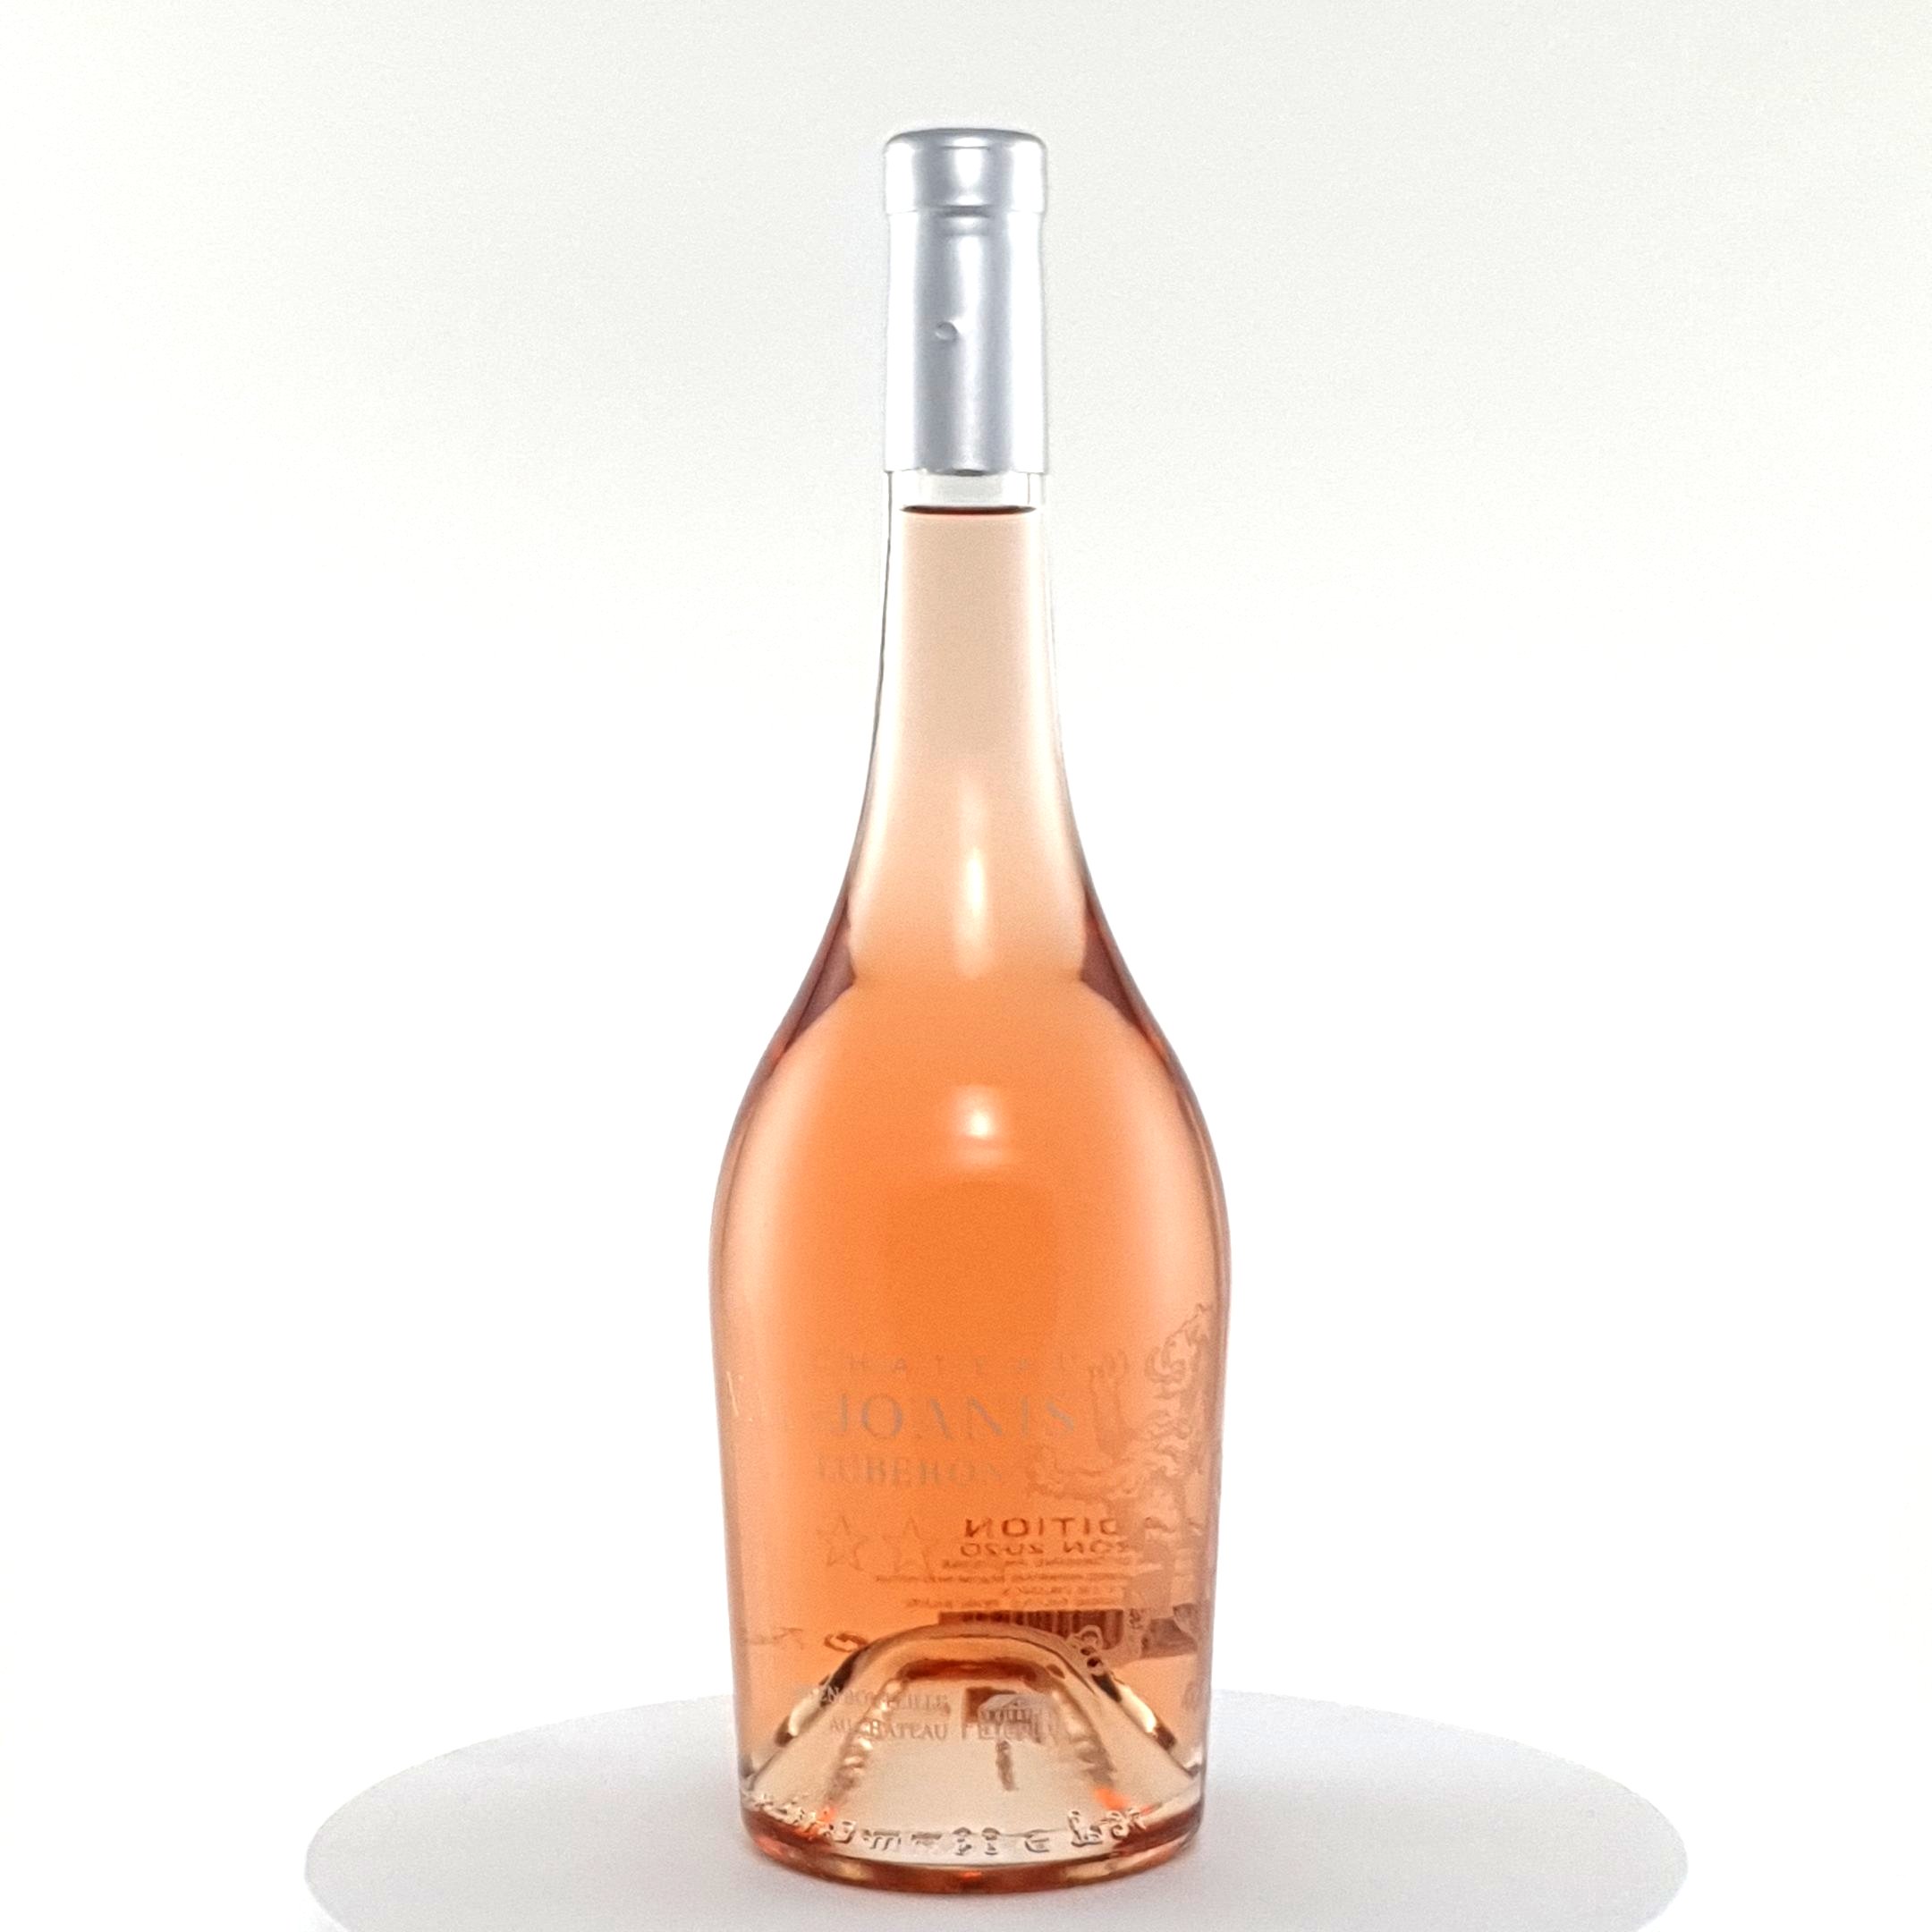 Val Joanis Luberon Tradition Rosé 2021